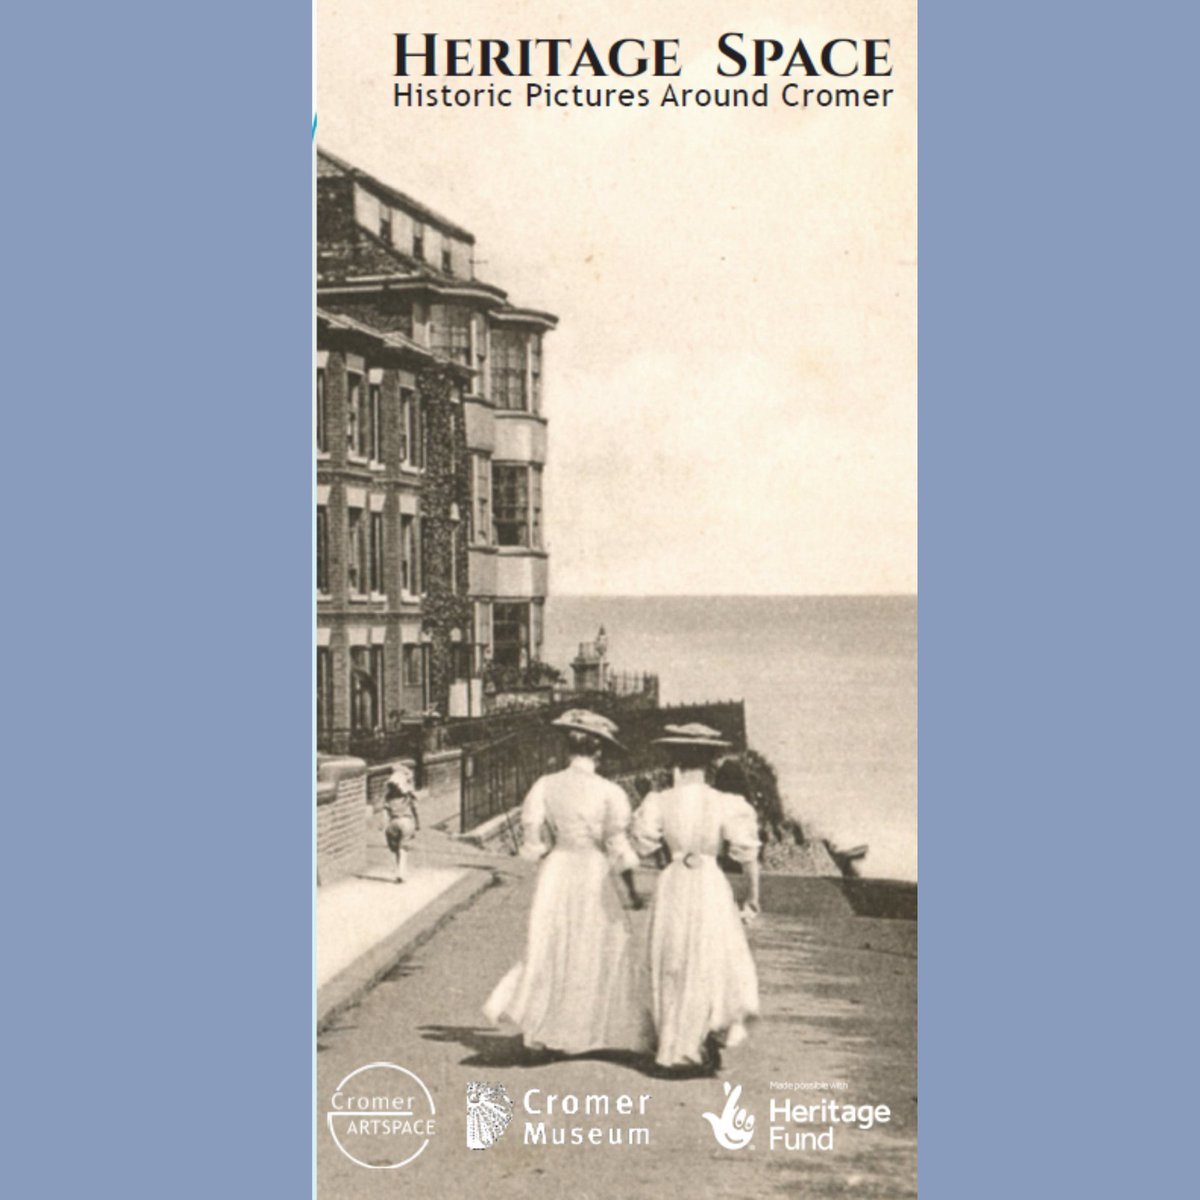 📢Free entry to Cromer Museum tomorrow, Friday and Saturday to celebrate Heritage Space with @CromerArtspace Thanks to @HeritageFundUK you will find 12 new community panels around town and activities at the museum. Read more and download guide here: bit.ly/3ORCC6W